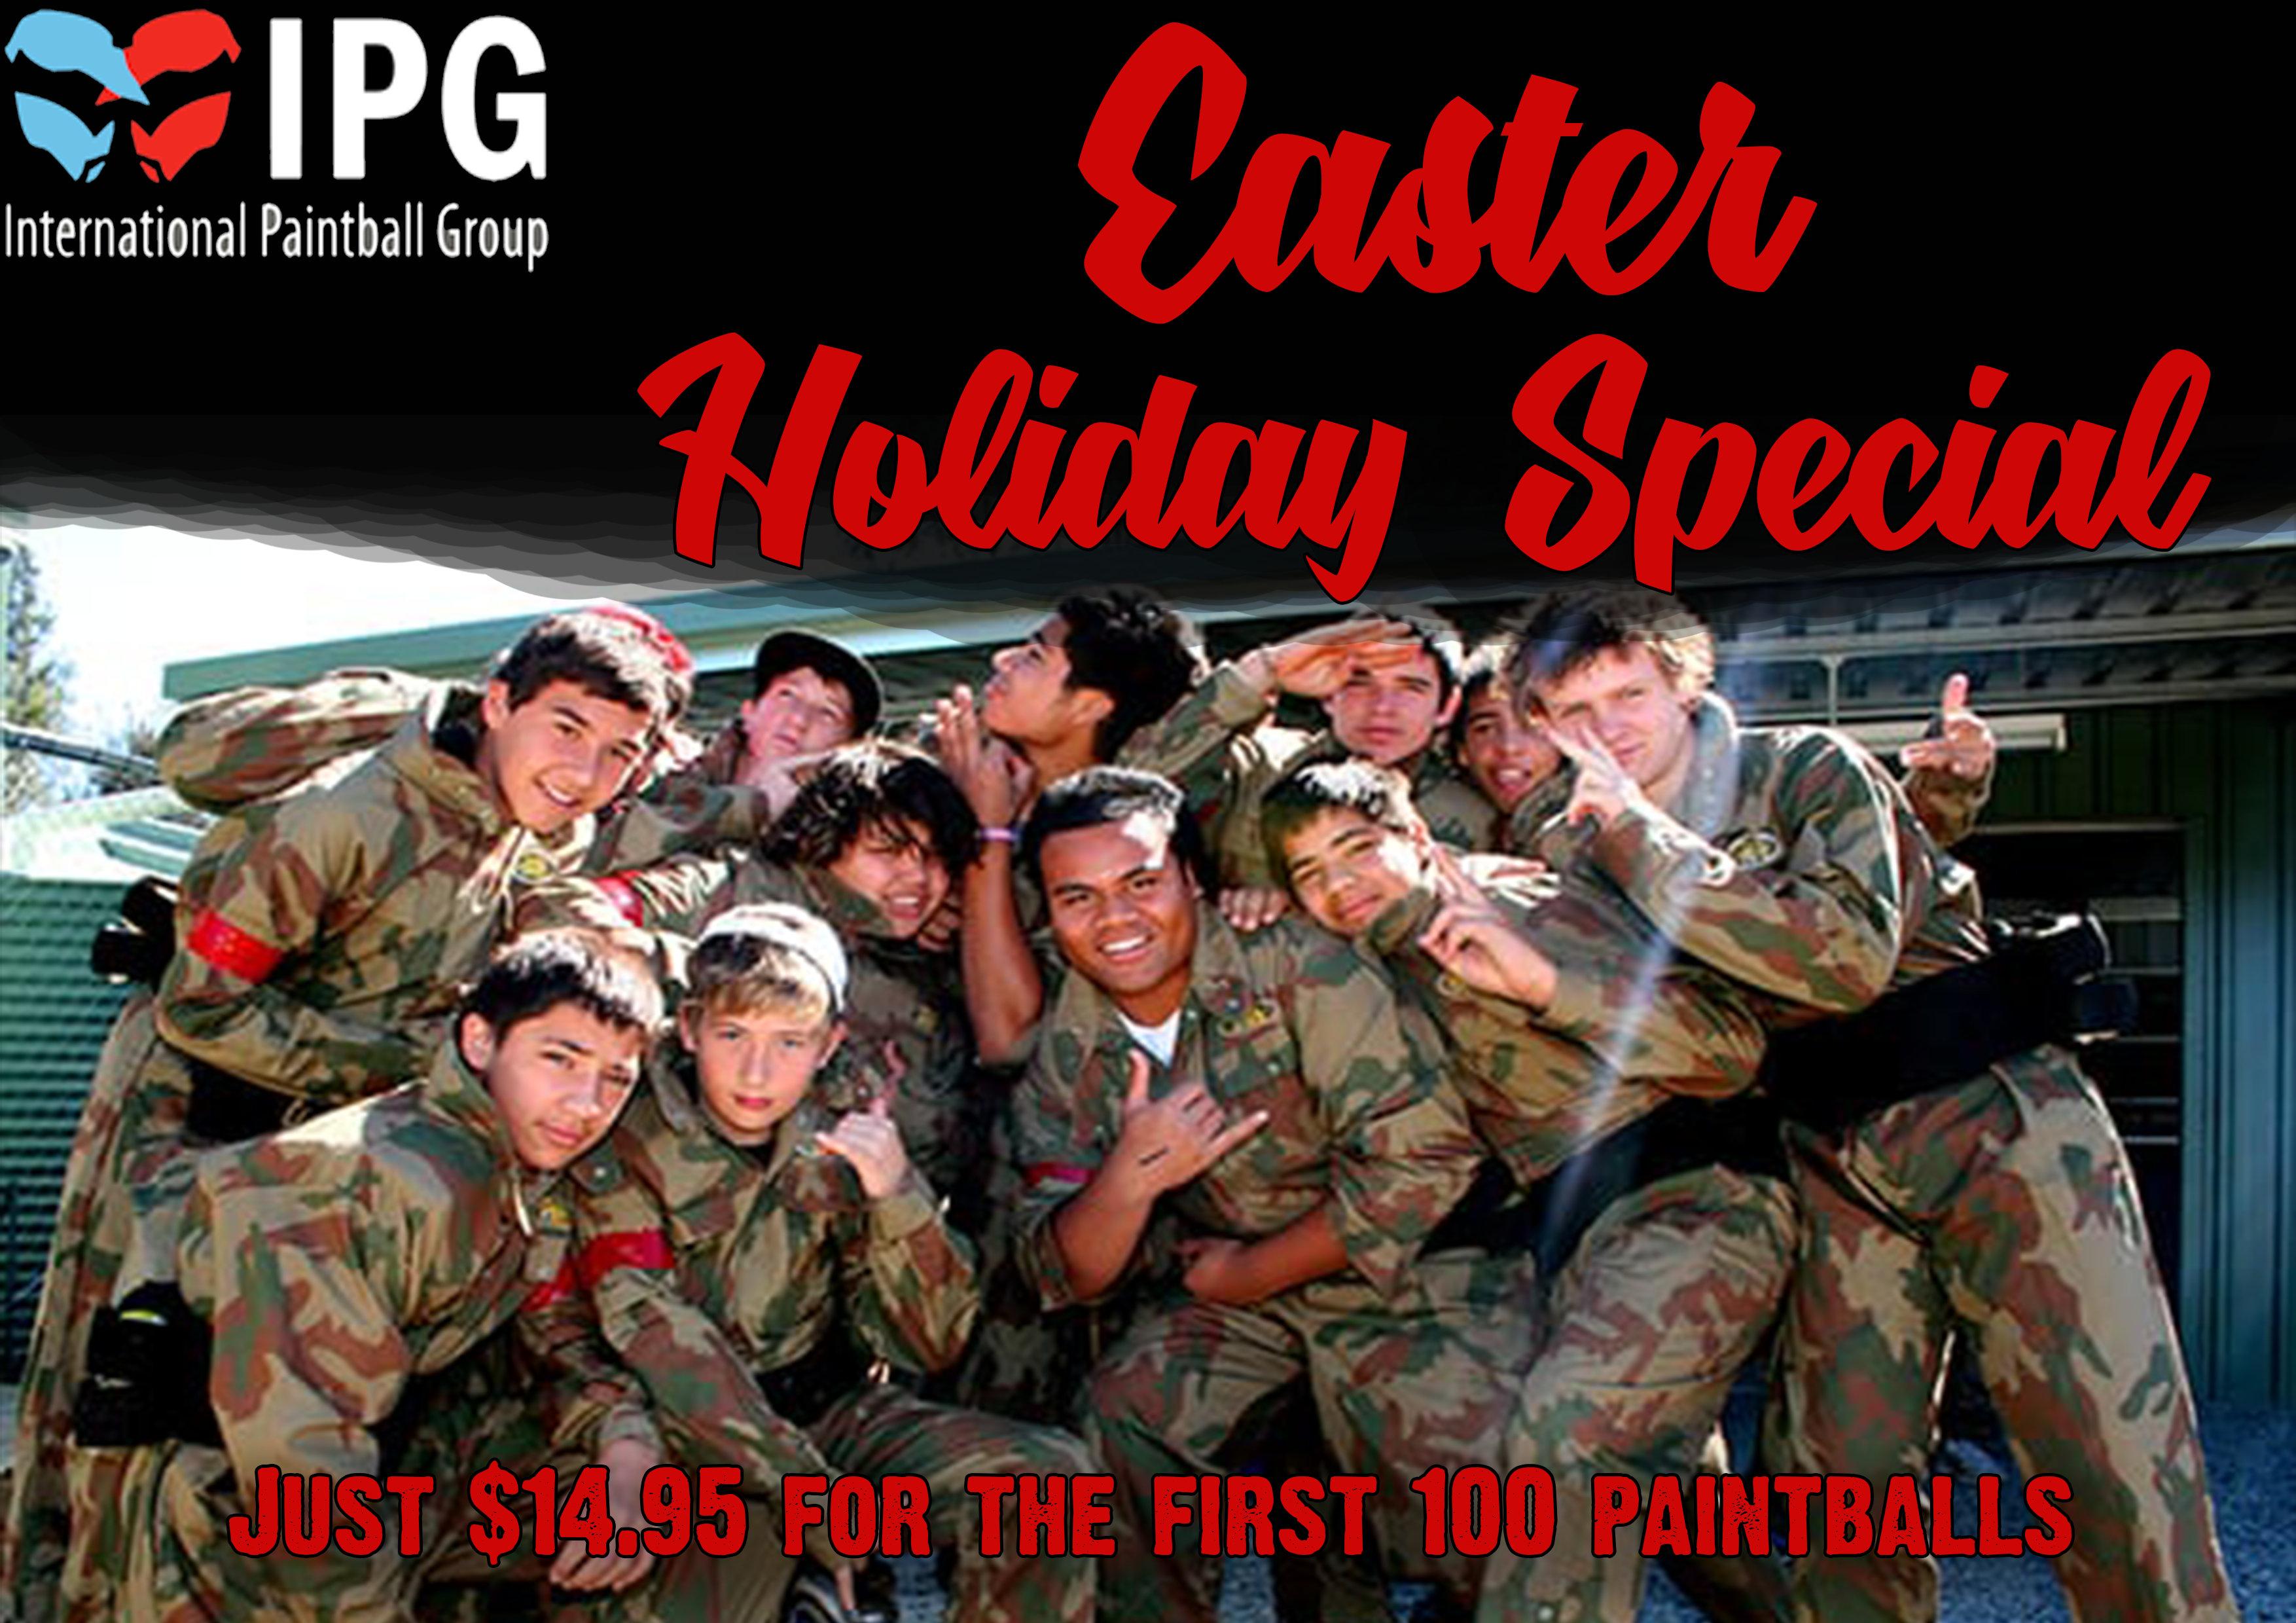 IPG Easter Holiday Special